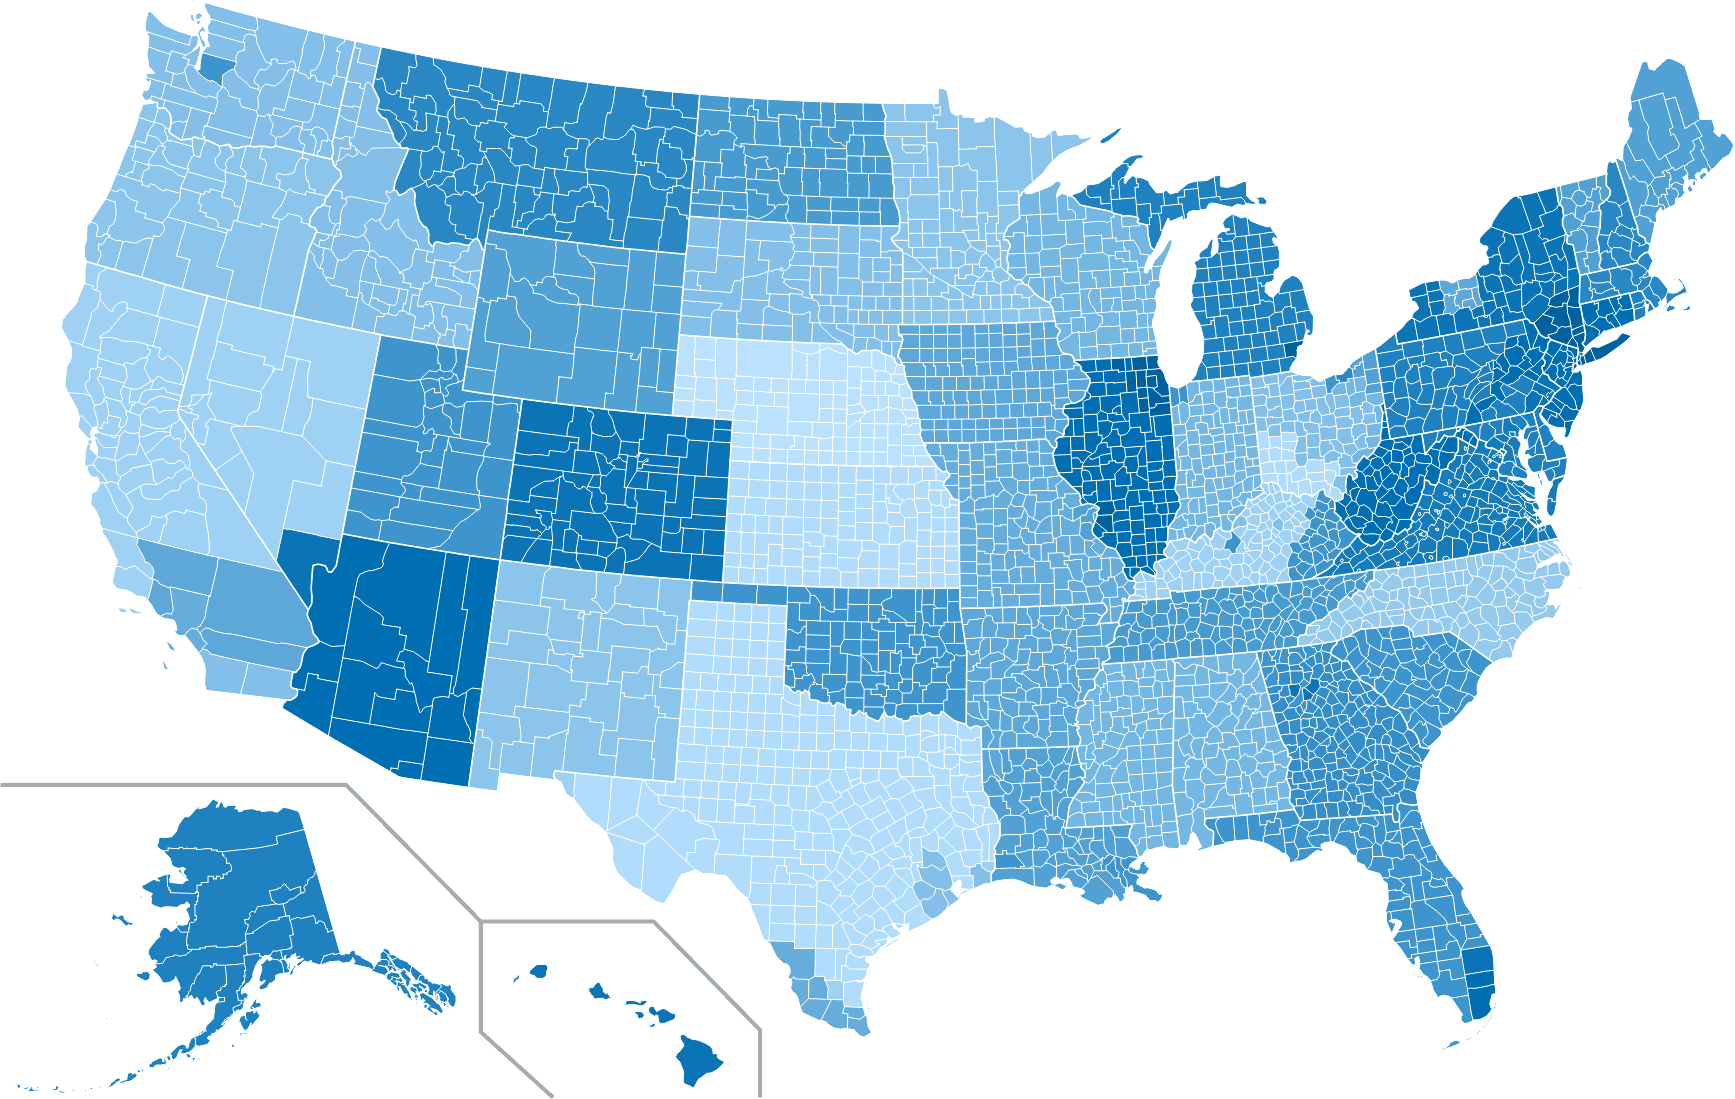 Malpractice Rate Heat Map - United States